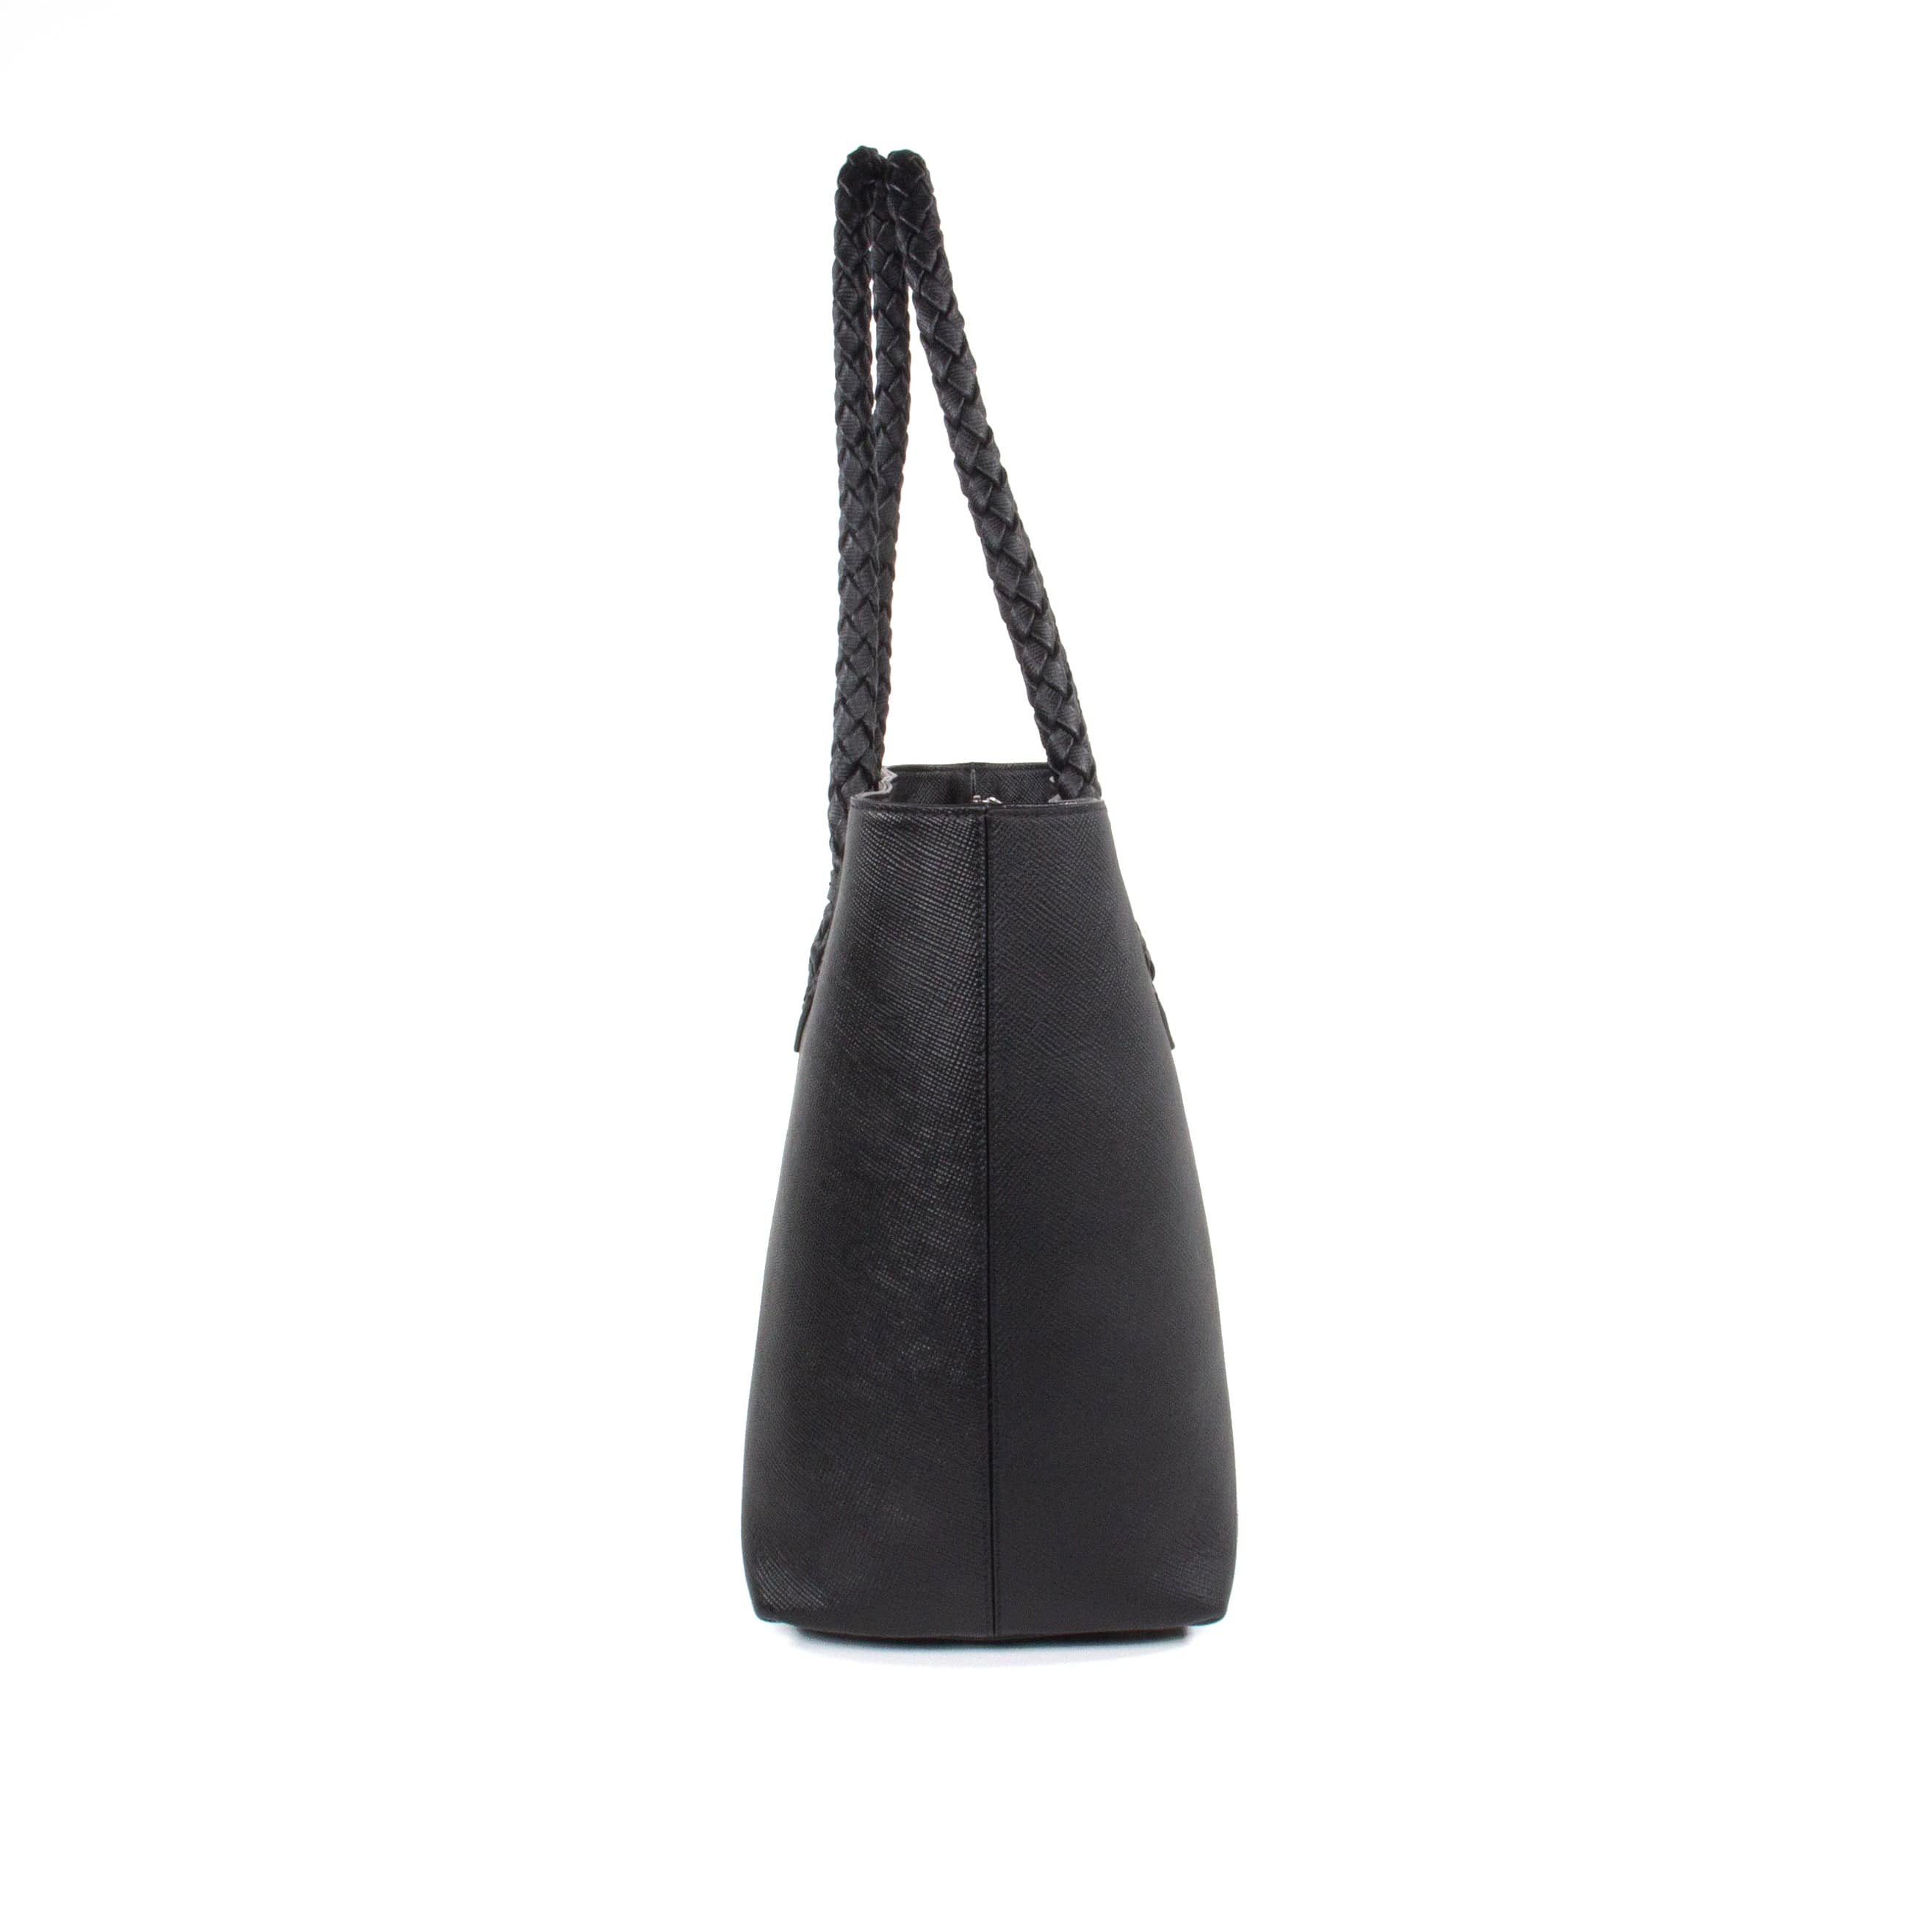 Luisa Tote Bag | Black Saffiano Leather | Made in Italy